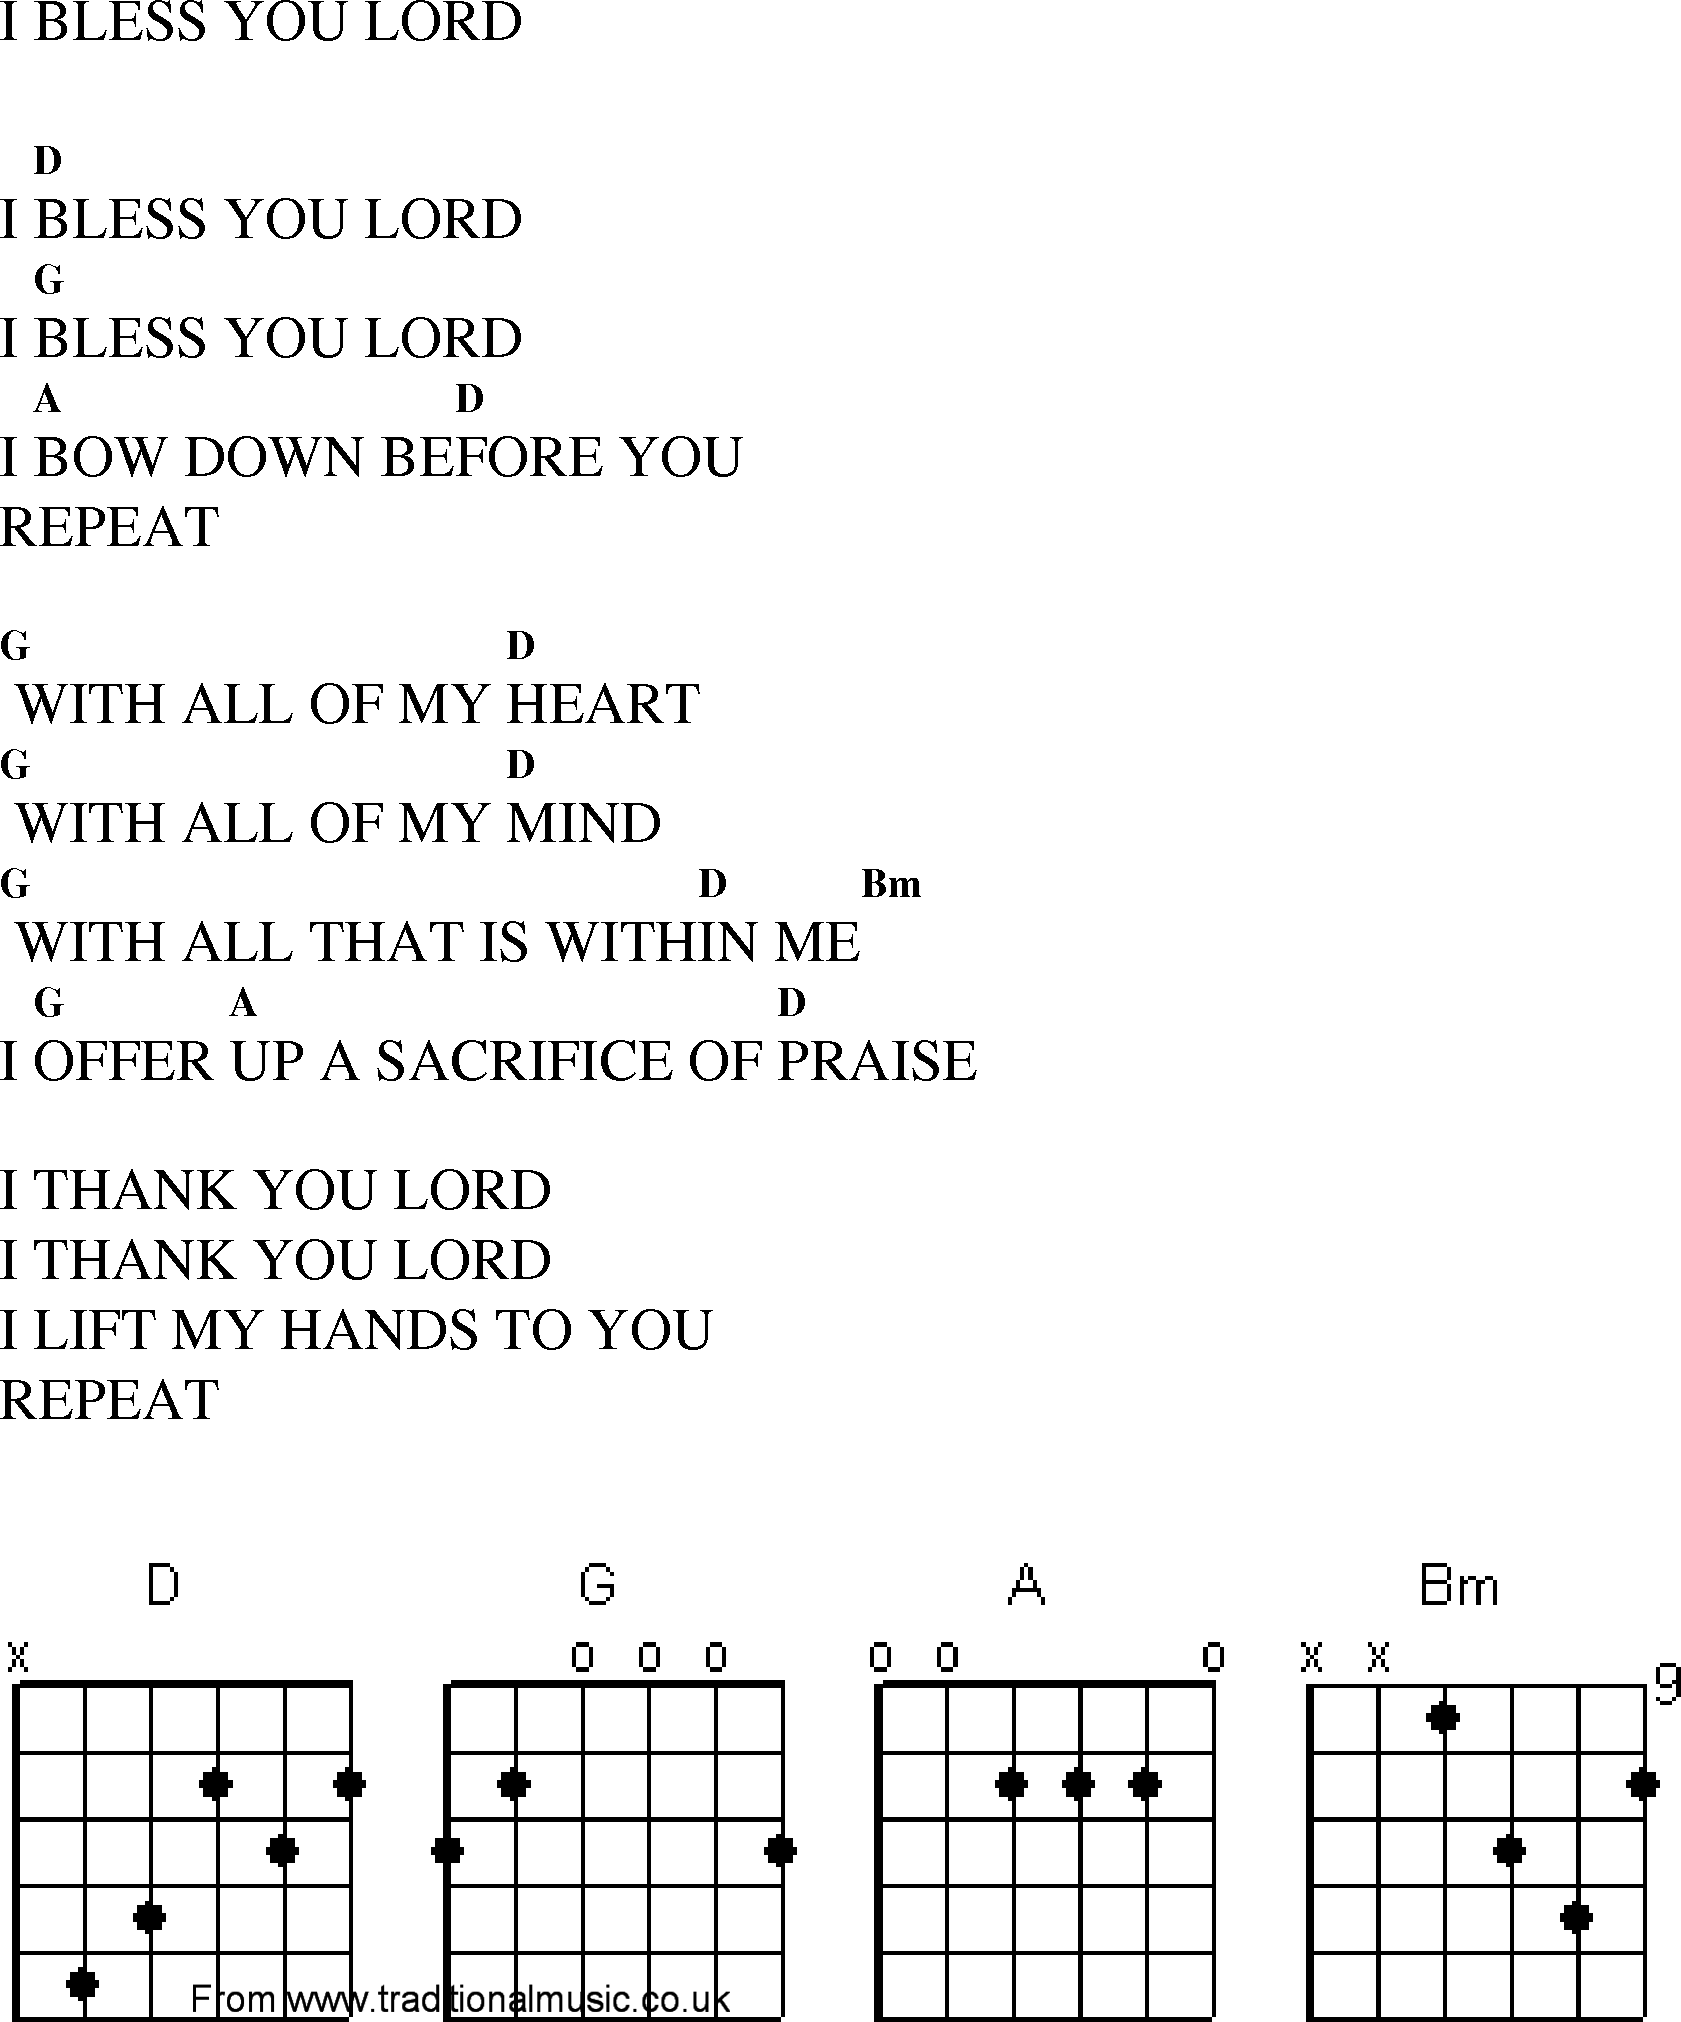 Gospel Song: i_bless_you_lord, lyrics and chords.